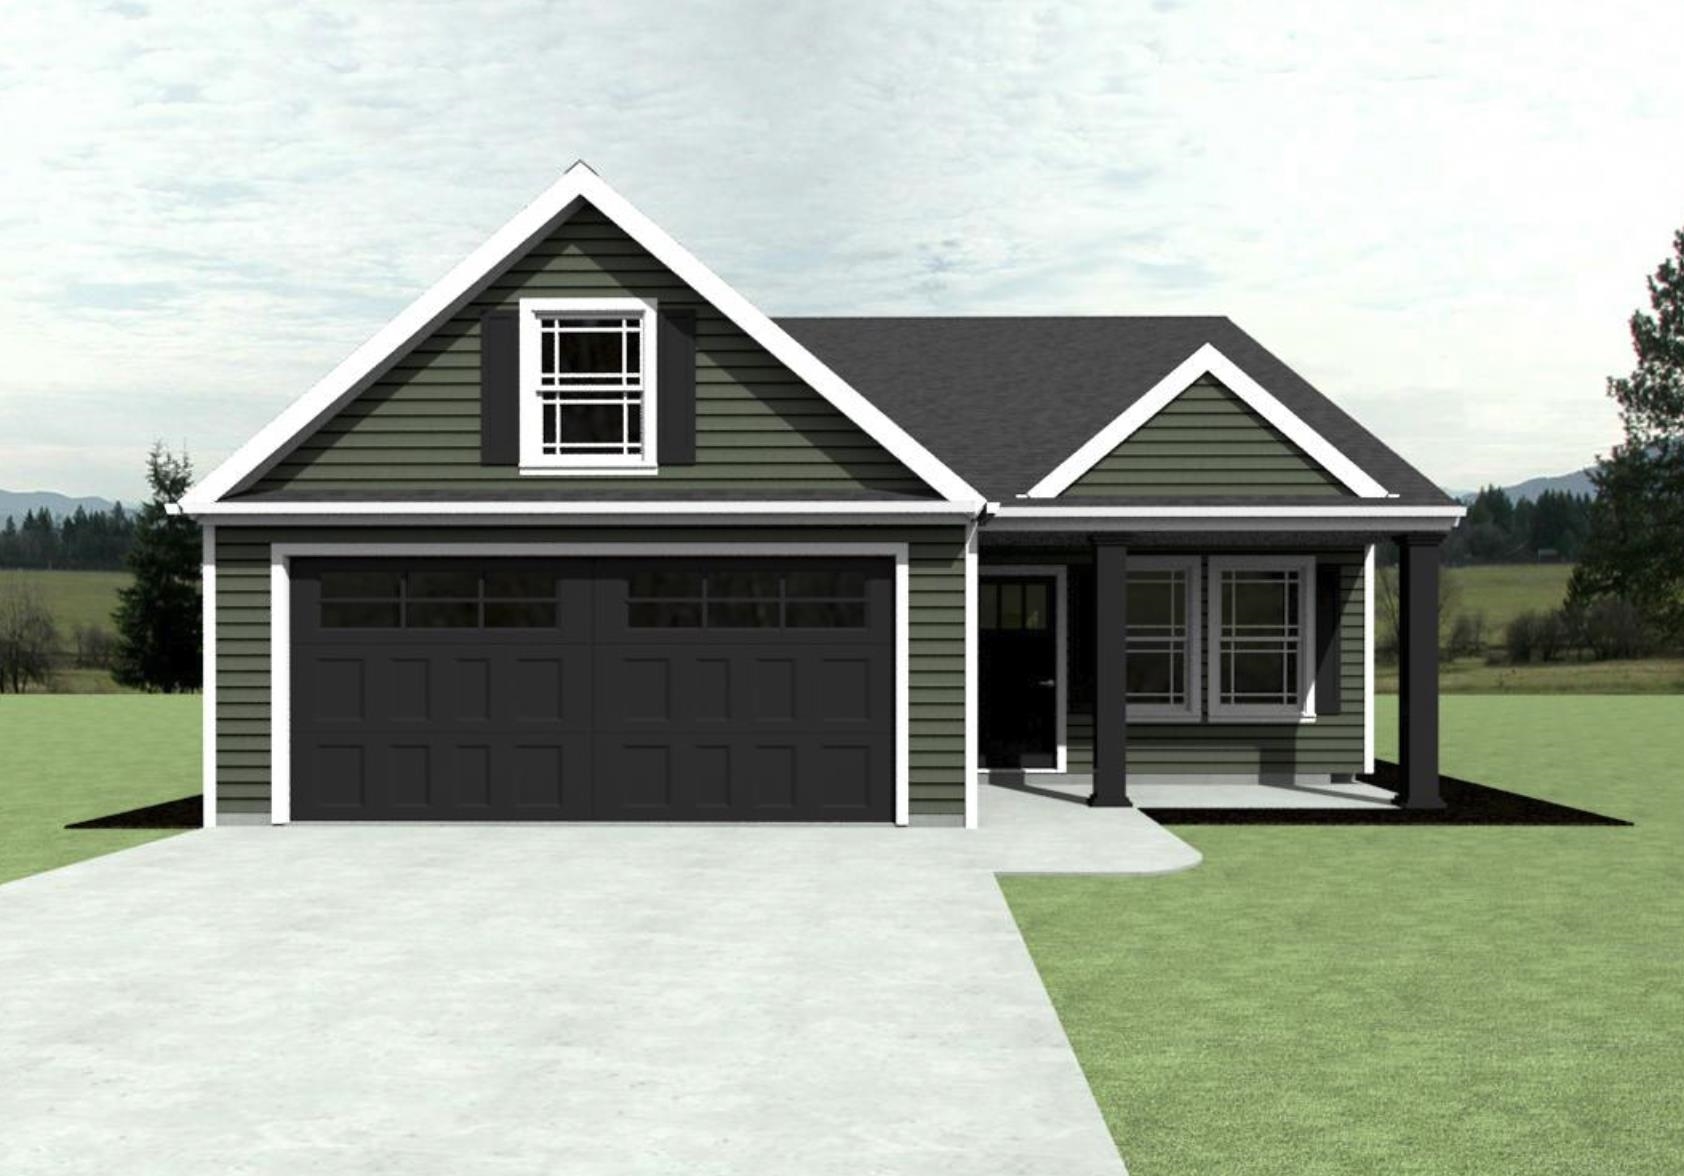 The Wellford Plan with Covered Patio and other upgrades! Local Builder committed to quality workmanship. Upgrade Luxury Vinyl Plan in living areas and wet areas. Carpet in bedrooms. Must See!  Virtual Tour reflects same house plan, not exact house. Options vary.